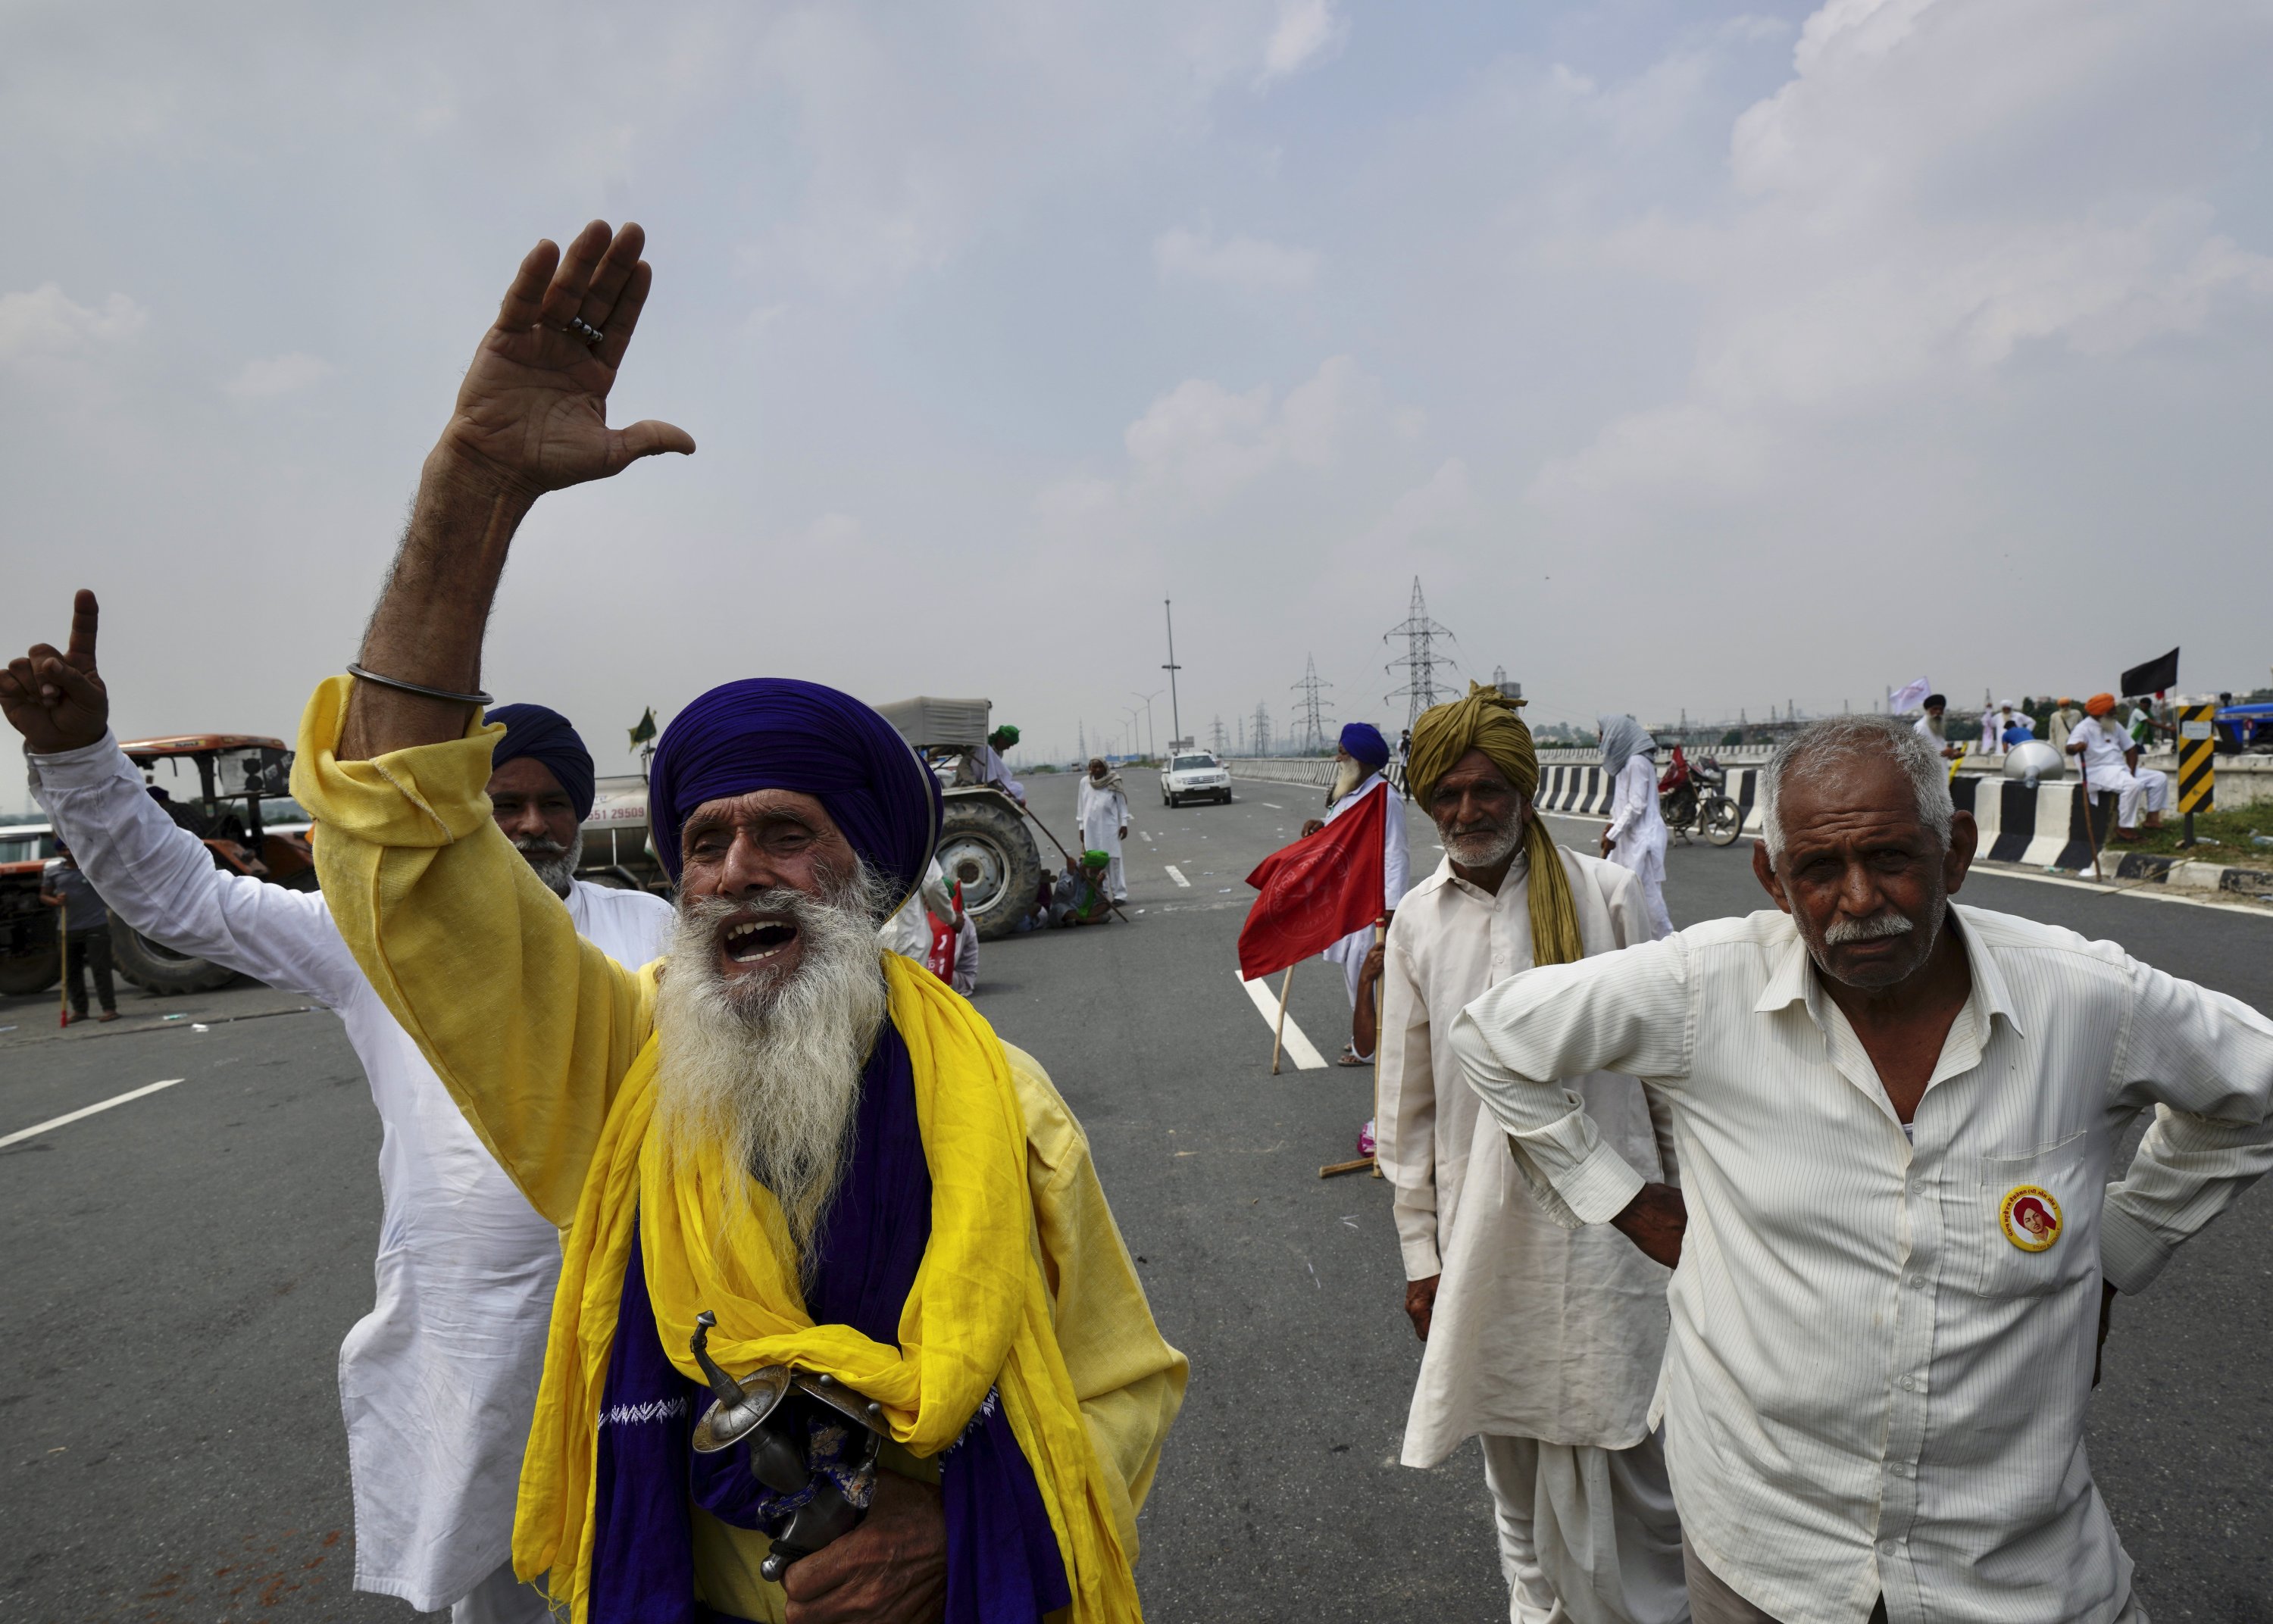 Protesting farmers gather at Singhu on the outskirts of New Delhi, India, Monday, Sept. 27, 2021. (AP Photo)